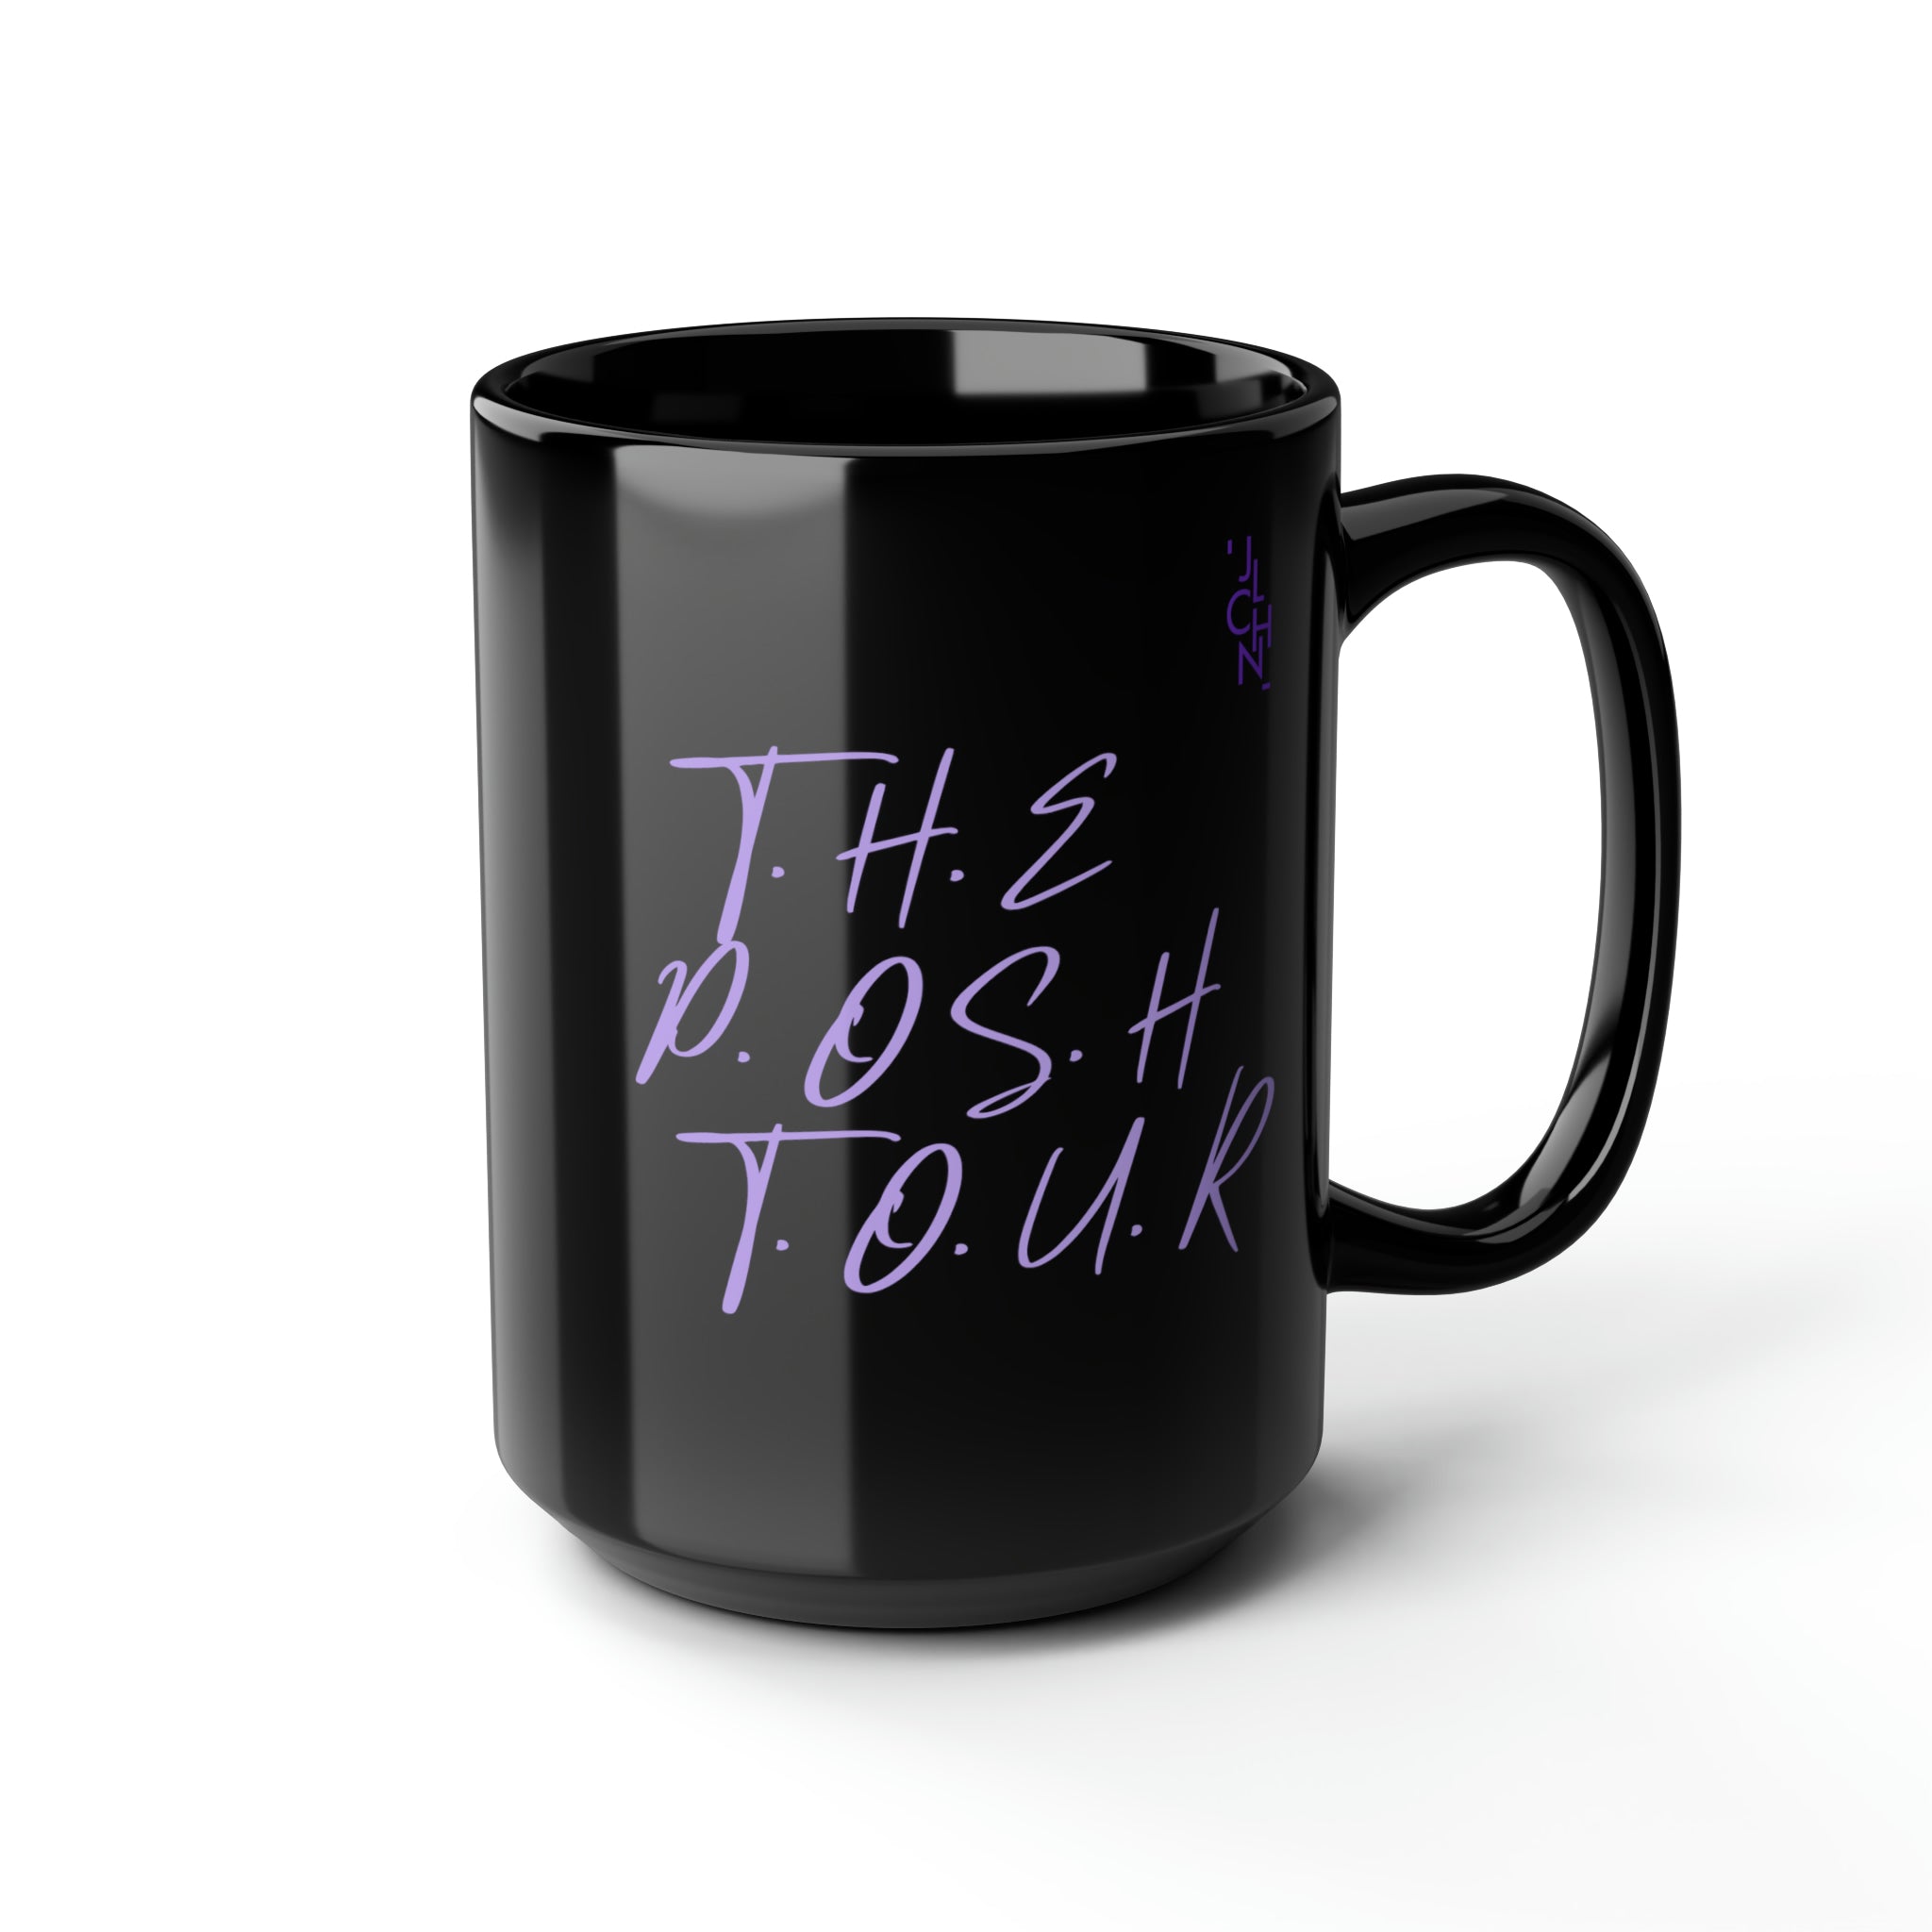 Savor Every Sip with Elegance: Juli Chan's Lavender Violet Logo Mug – 450 ml of Musical Bliss And Posh Tribute to 'The Posh Tour